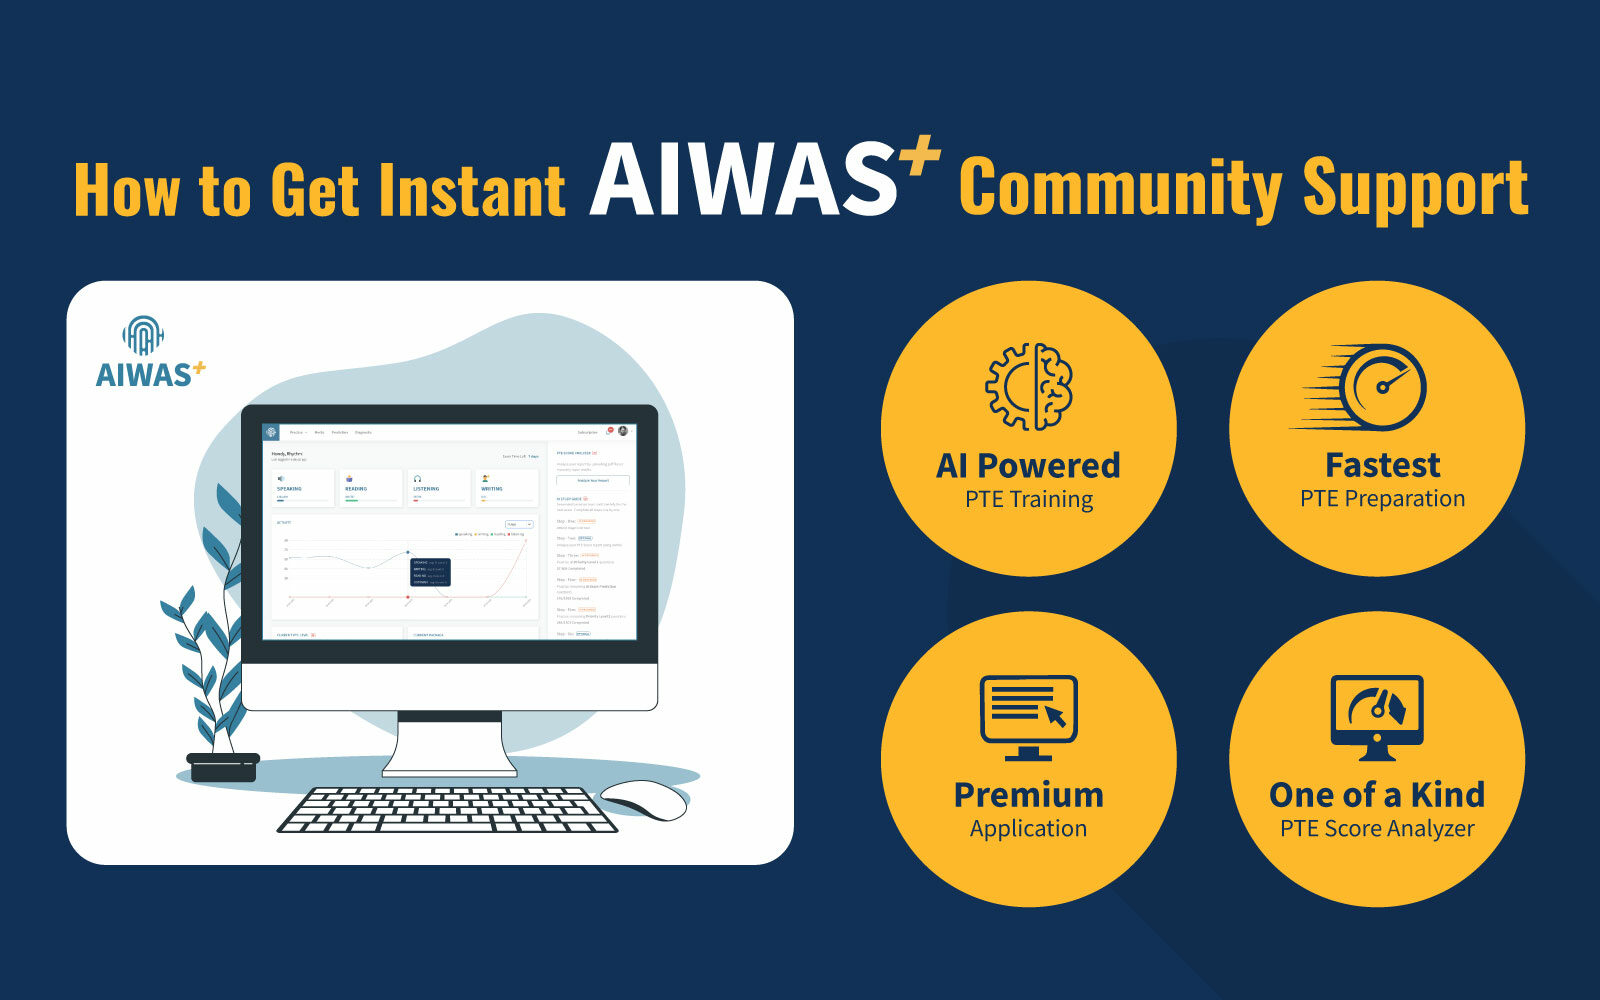 How to Get Instant Community Support from AIWAS Specialists?